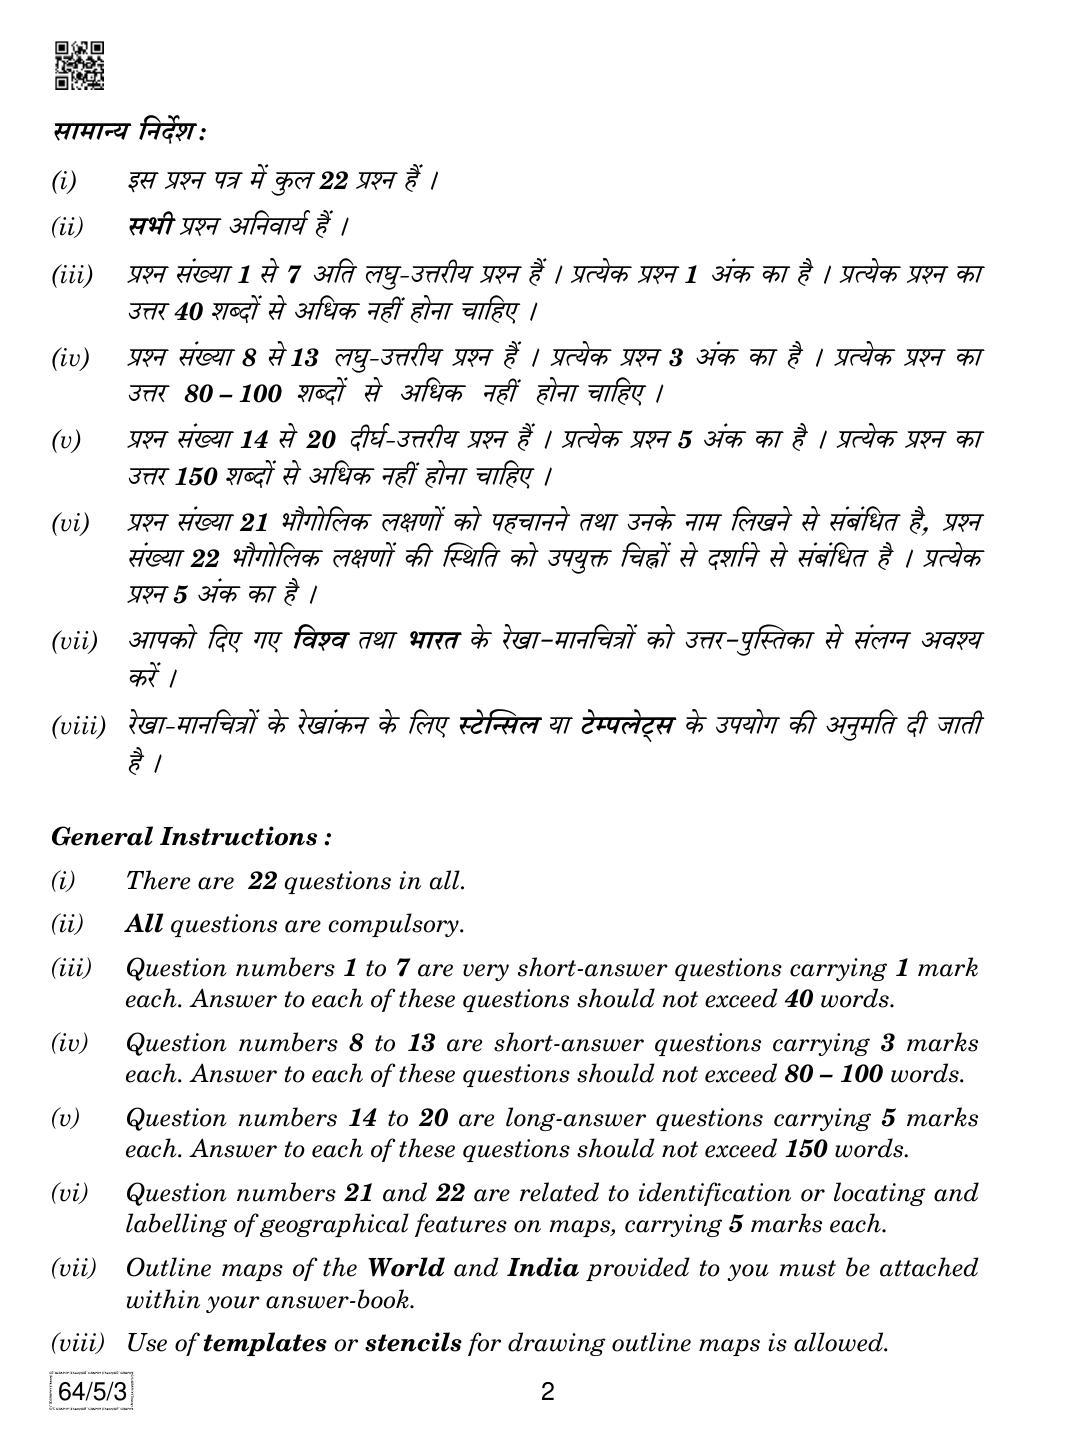 CBSE Class 12 64-5-3 Geography 2019 Question Paper - Page 2